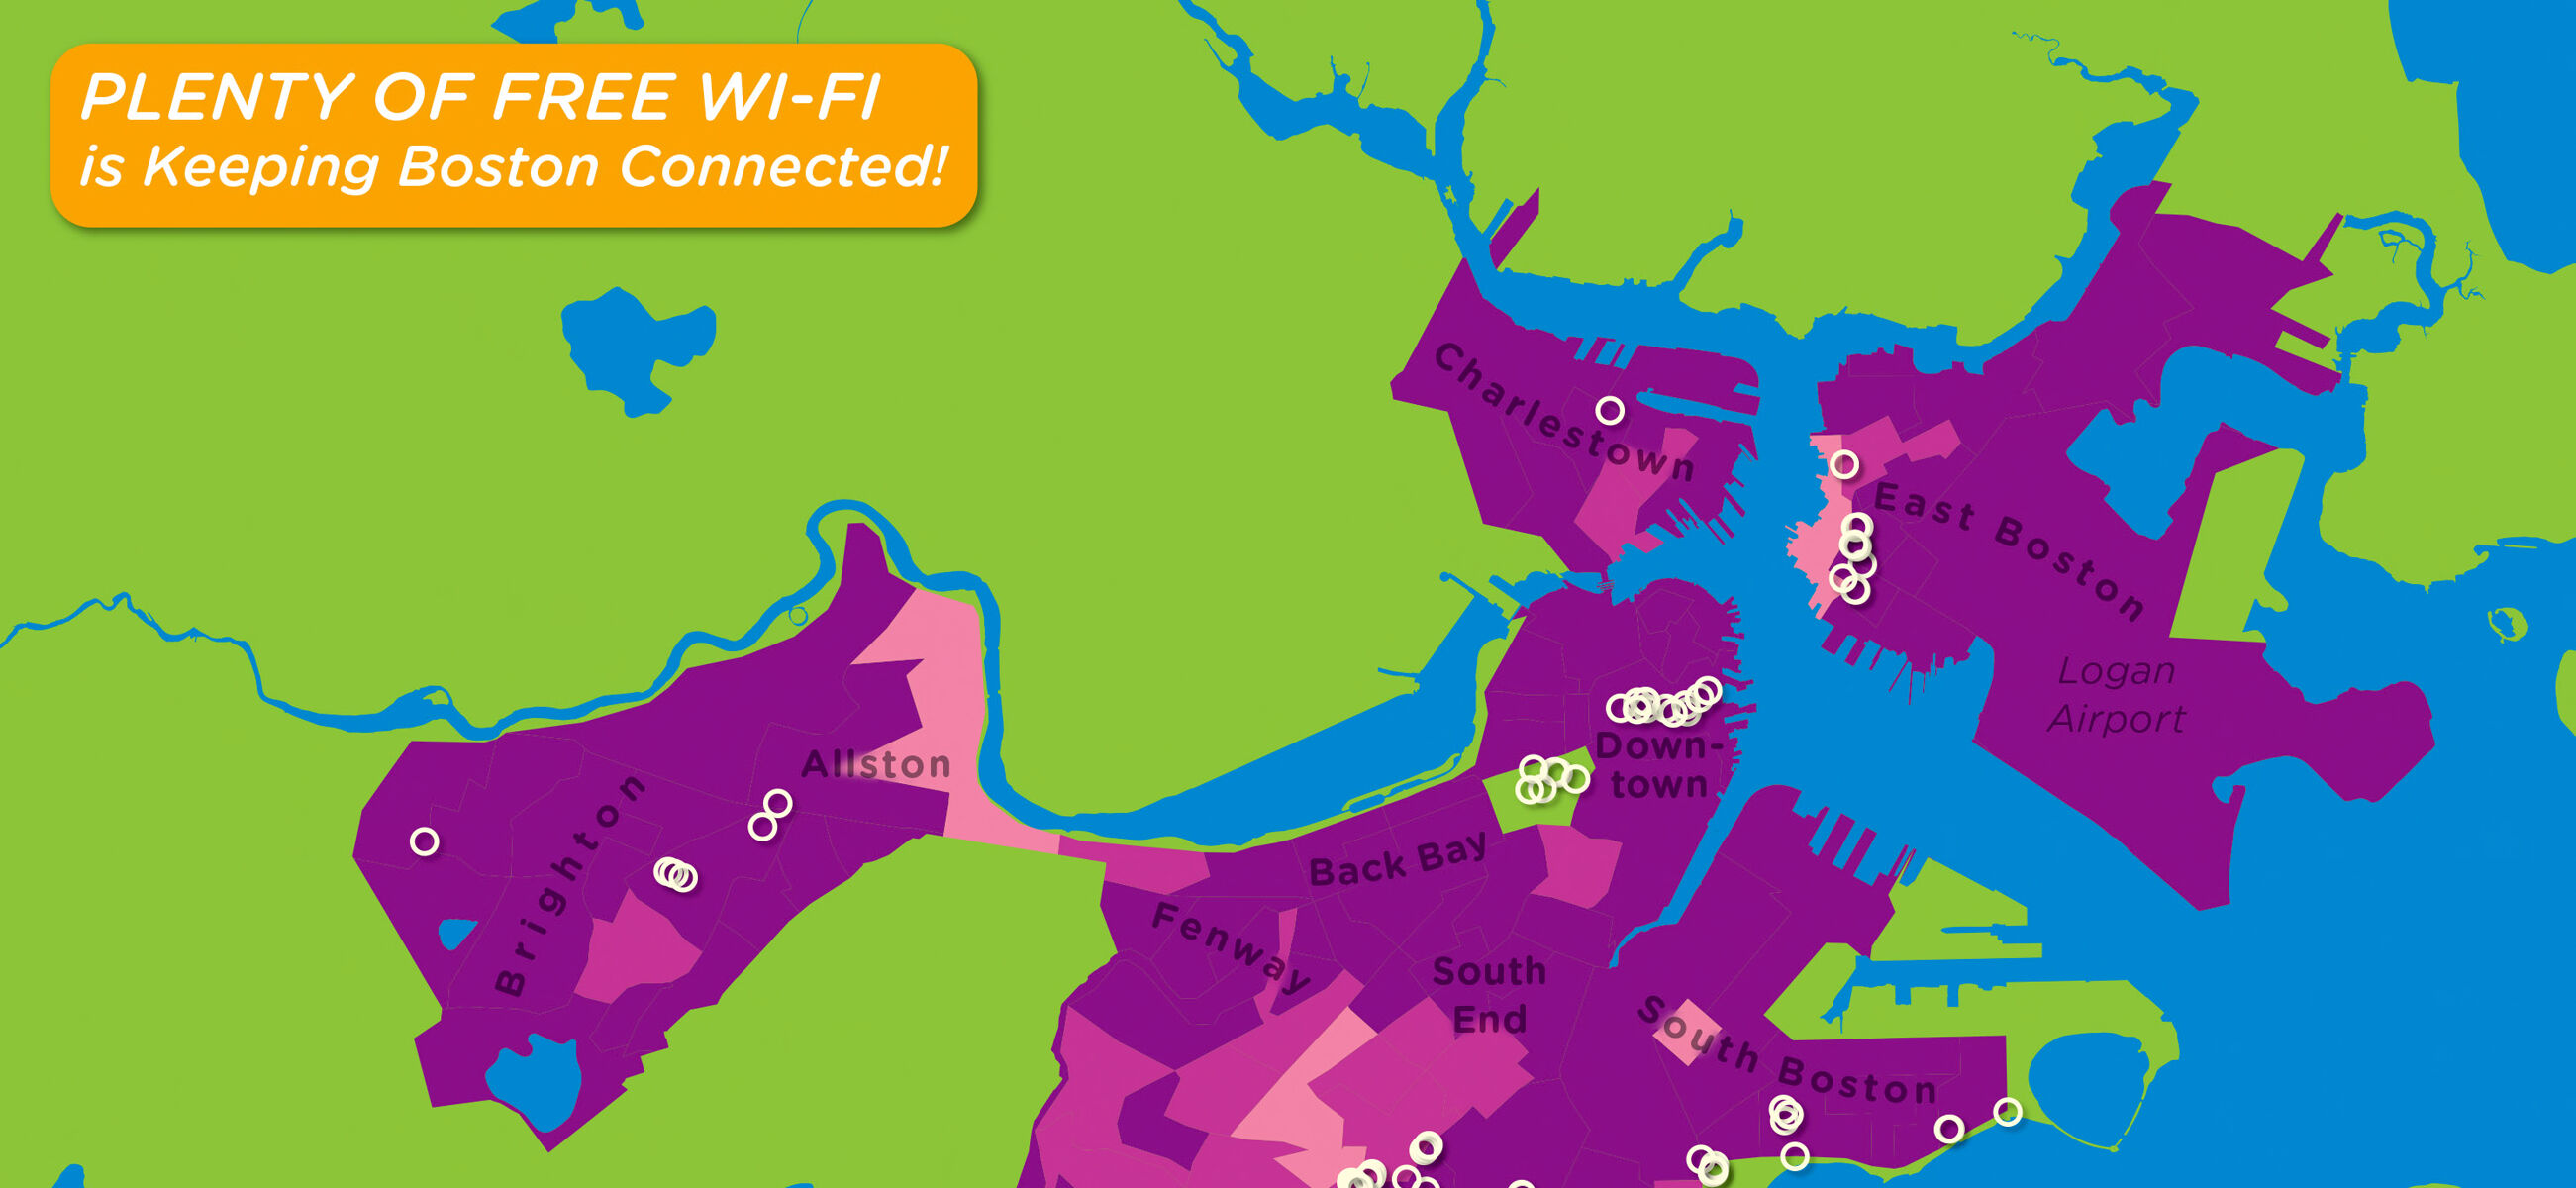 Excerpt of internet access map